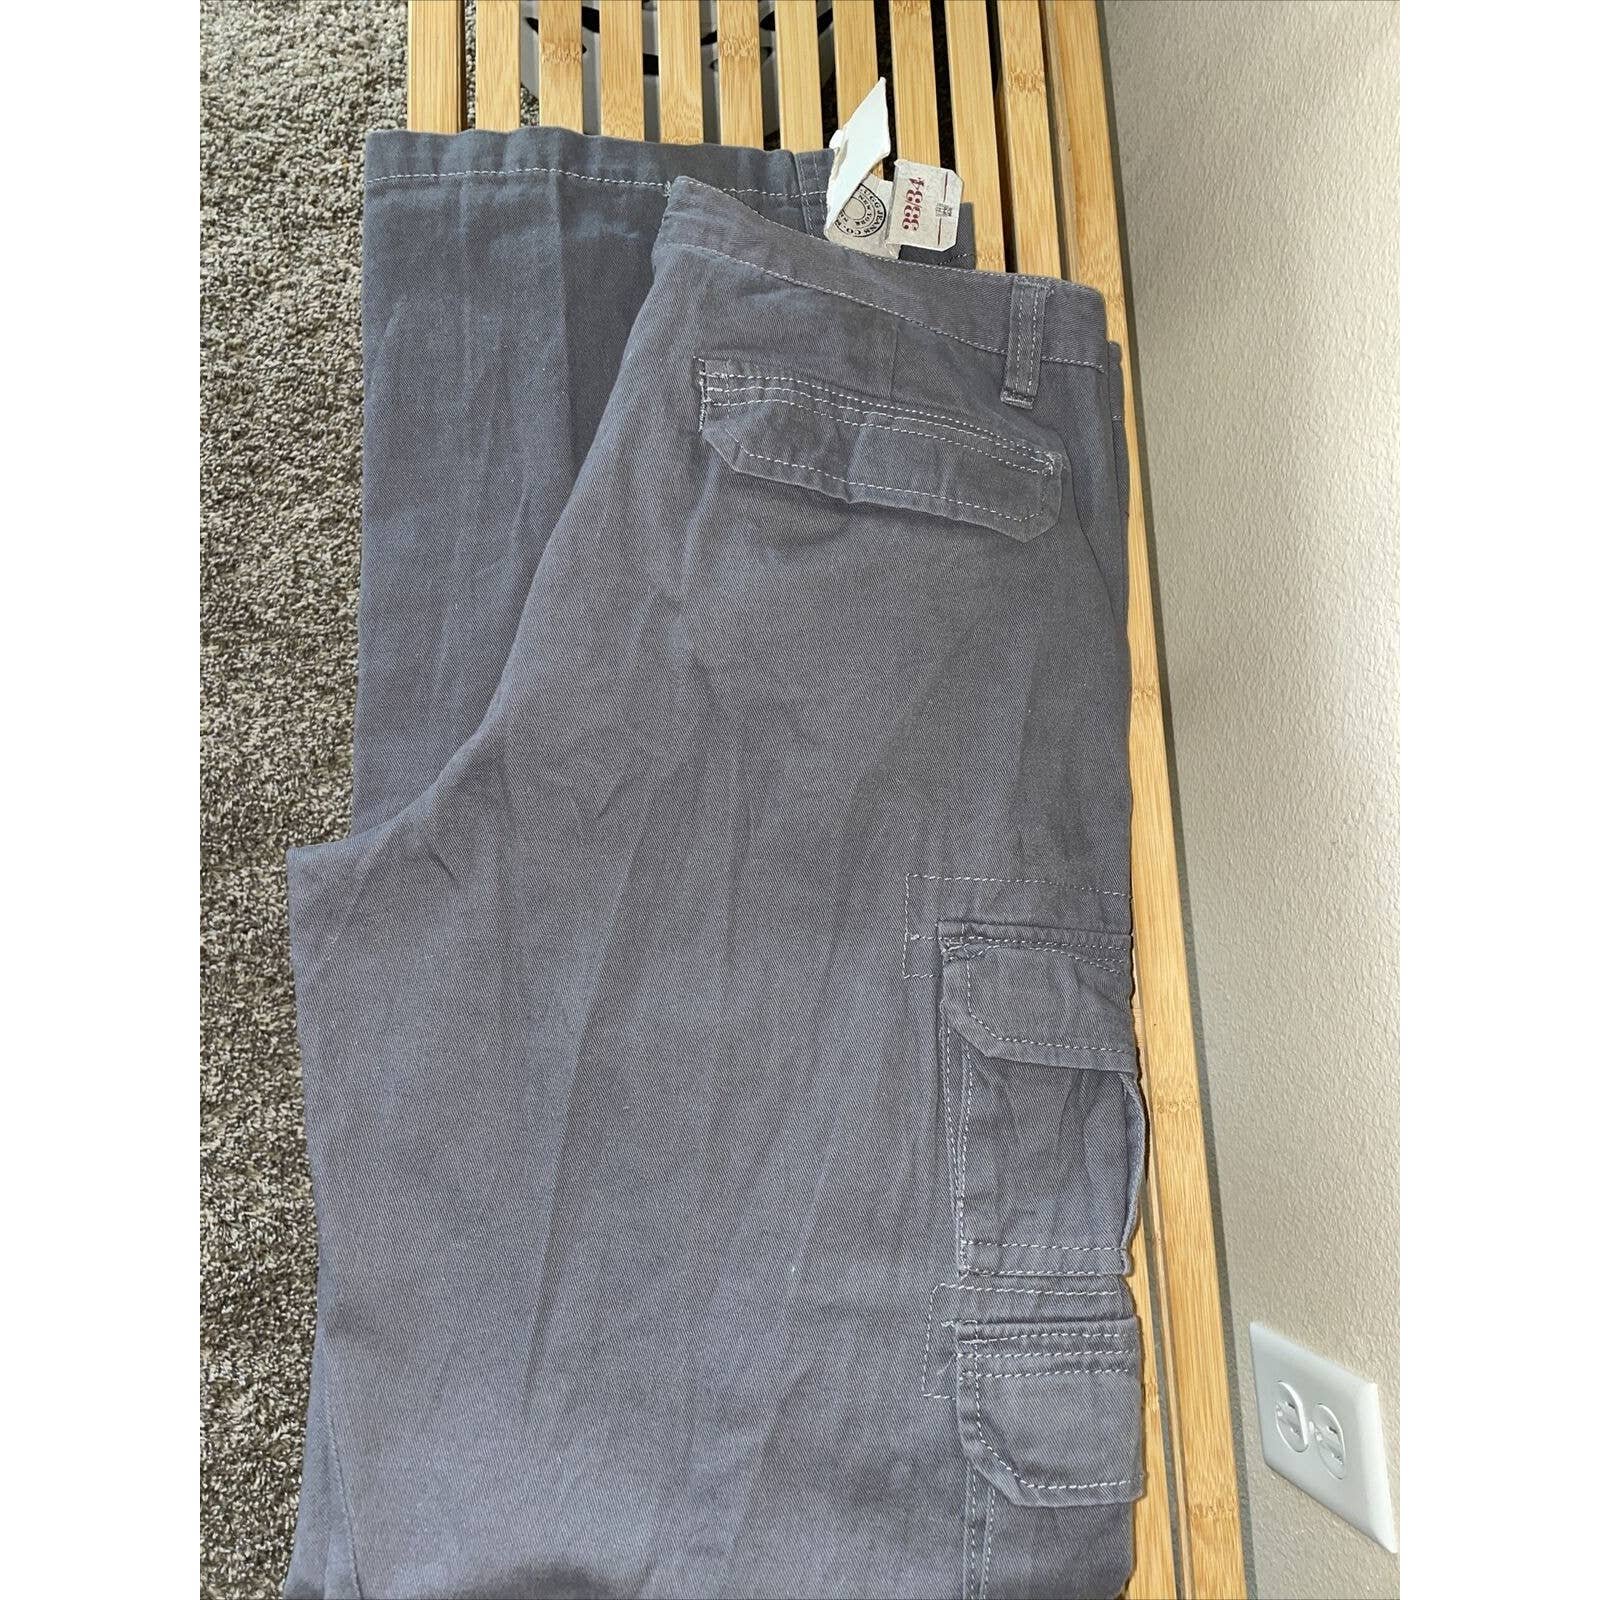 Plugg Jeans Company Men´s Grey Pants Cargo Straight Legs Size 33/34 NWT Y2K 4sEUSBFzX